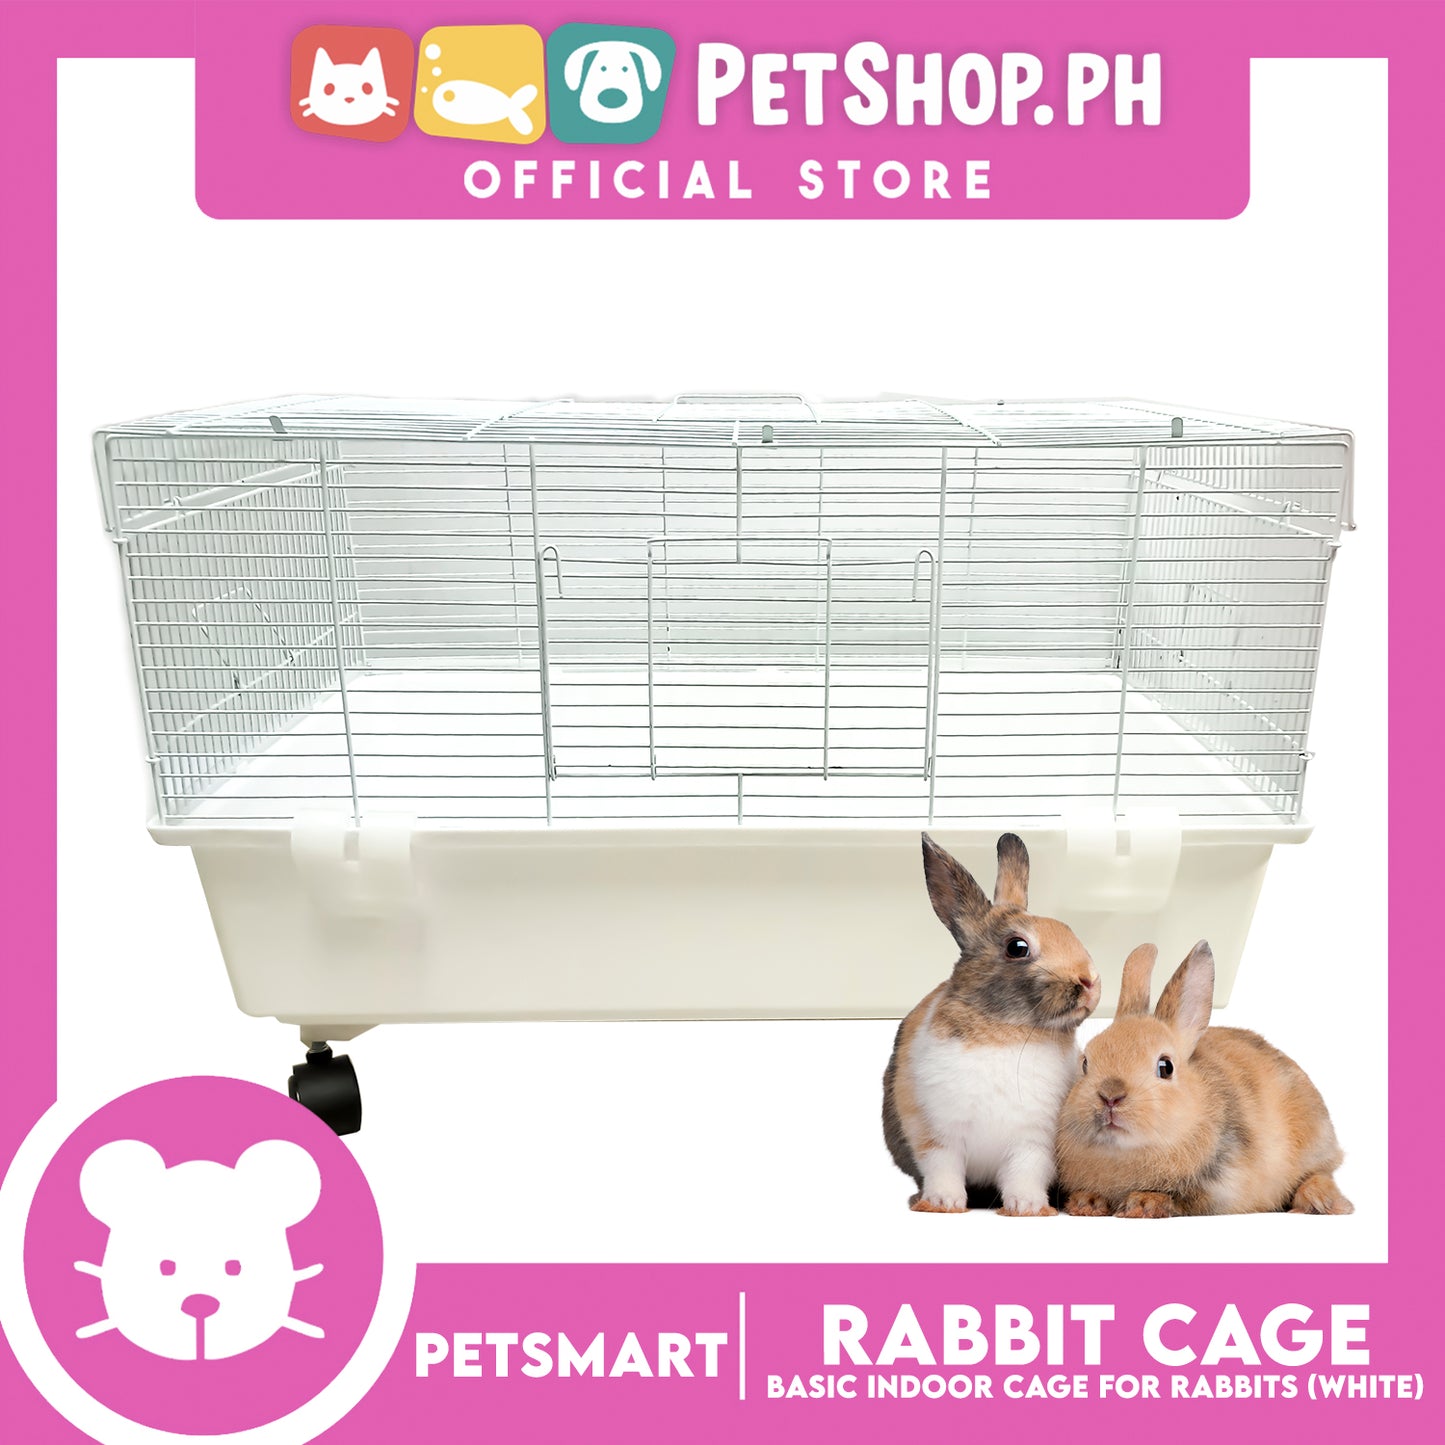 Rabbit Cage, Basic Indoor Cage For Pets (F16004) White Color, 60cm x 38cm x 40cm